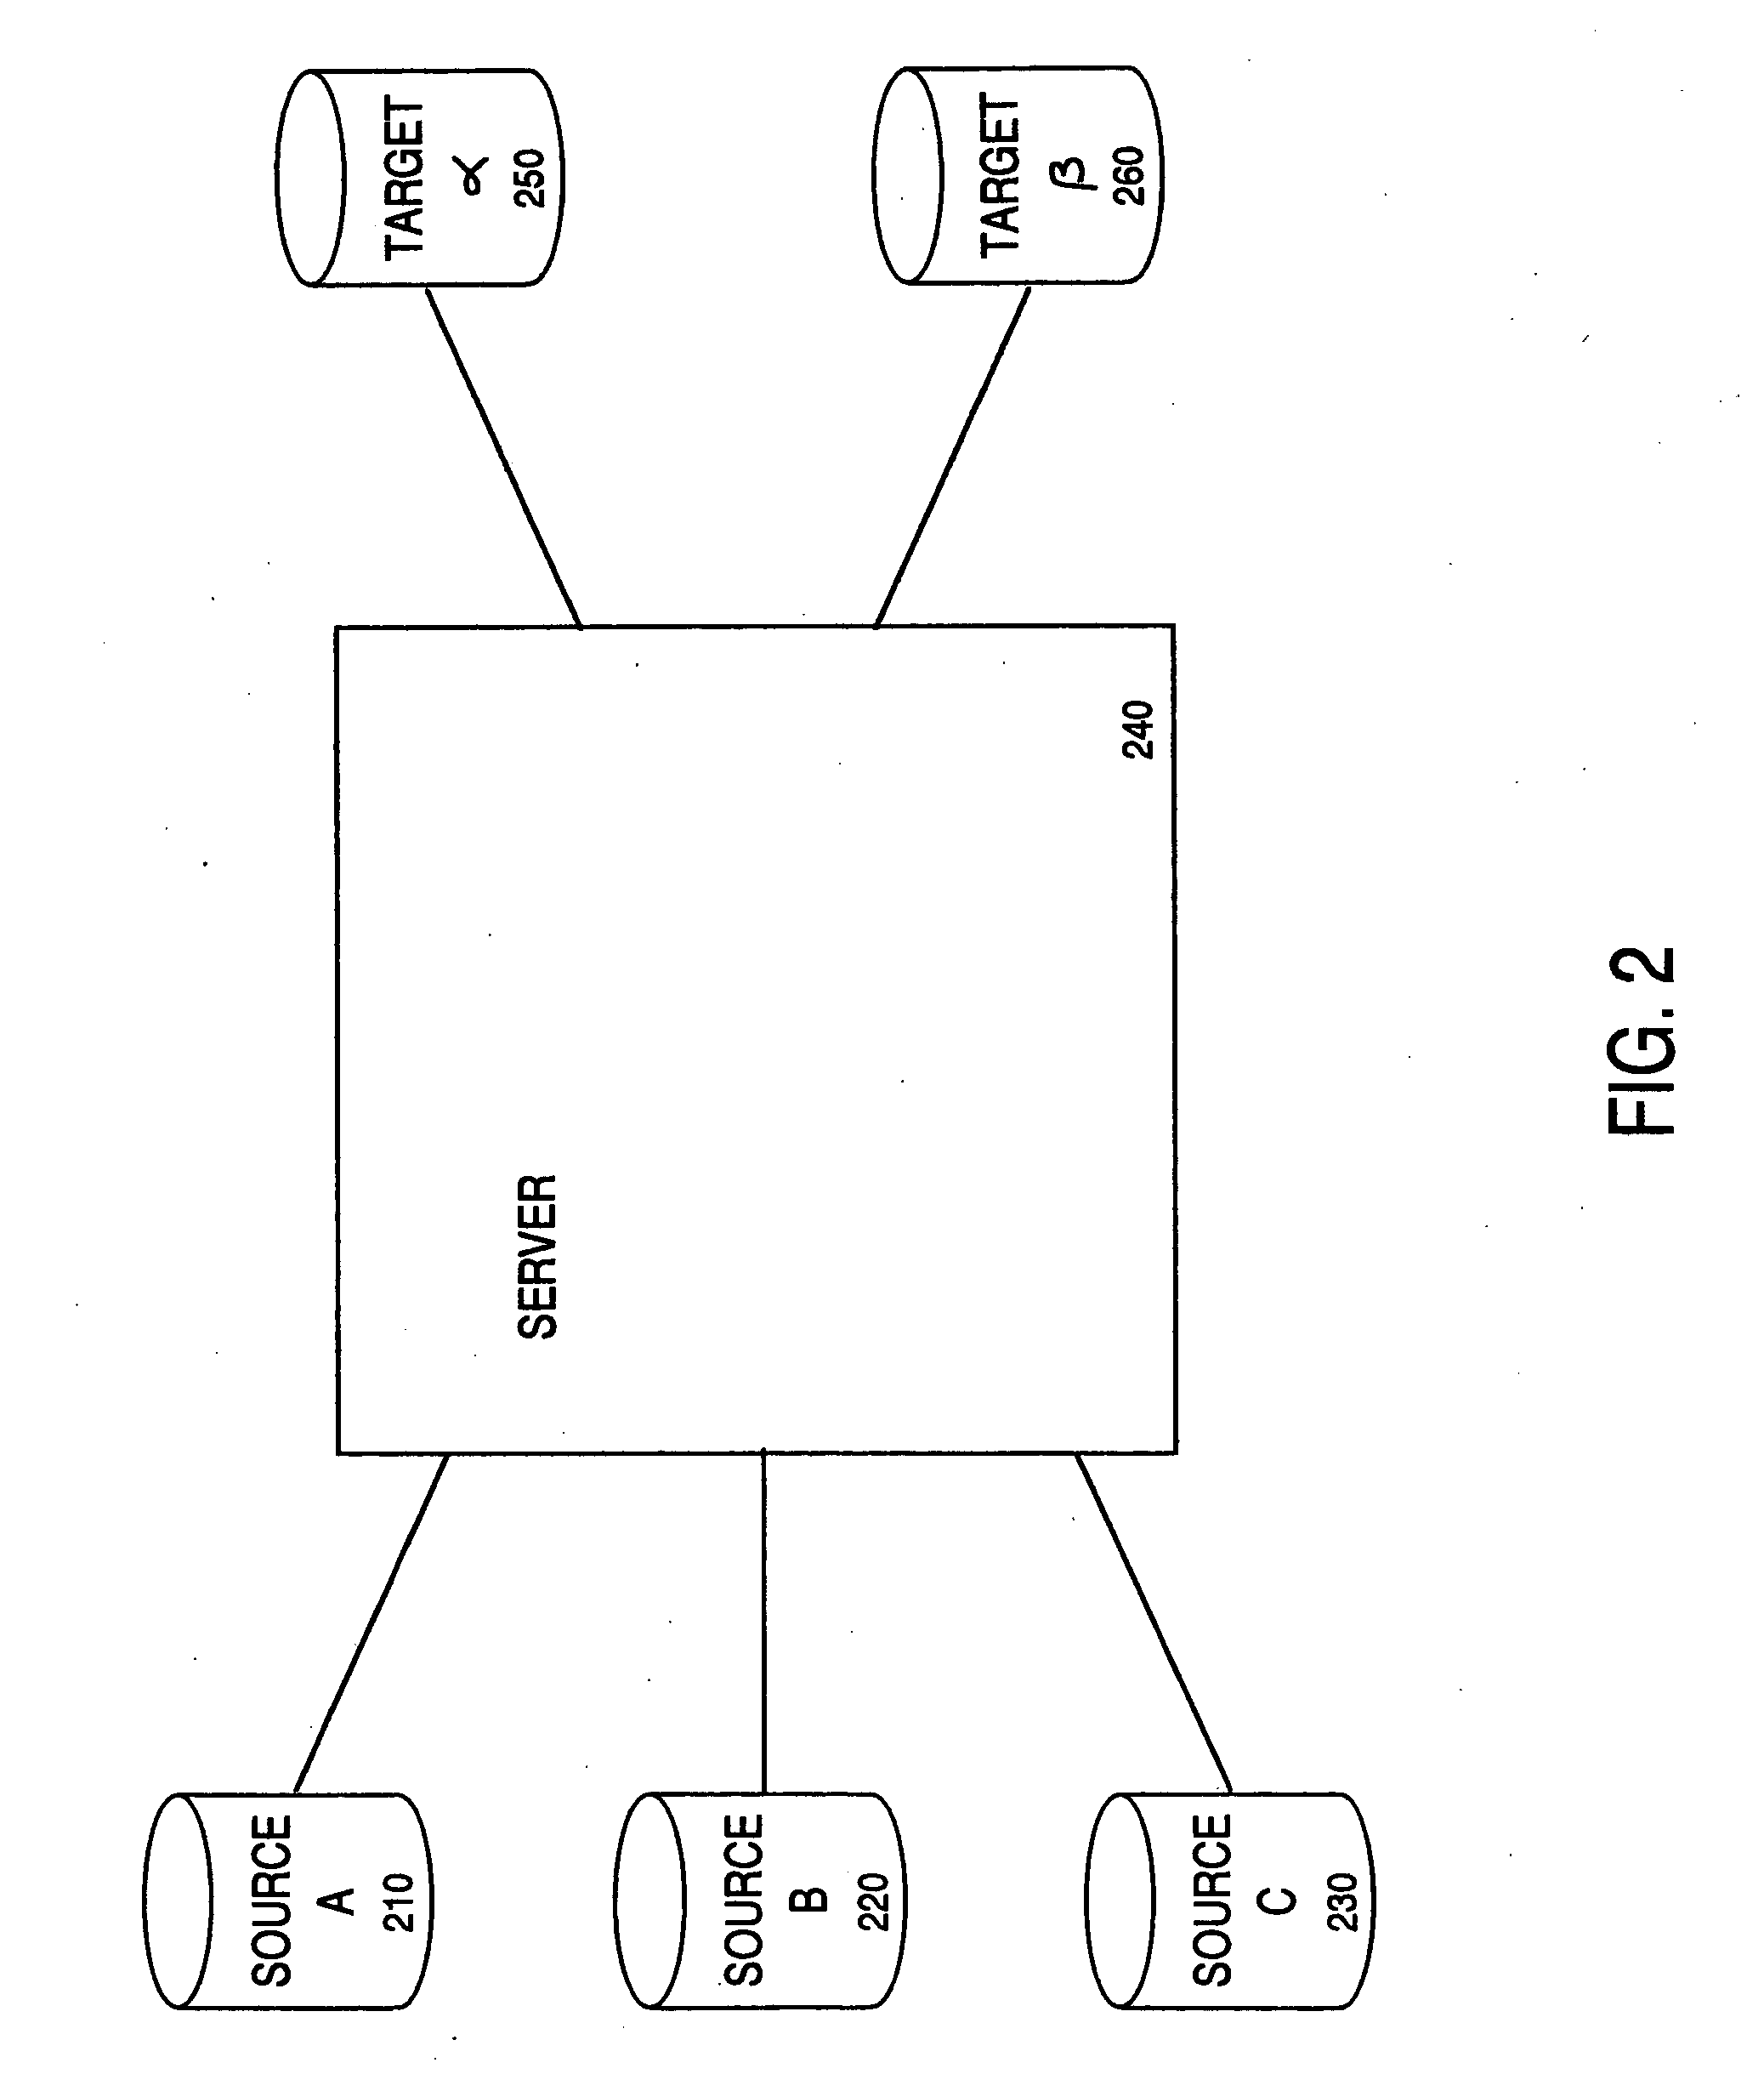 Method and apparatus for transporting data for data warehousing applications that incorporates analytic data interface